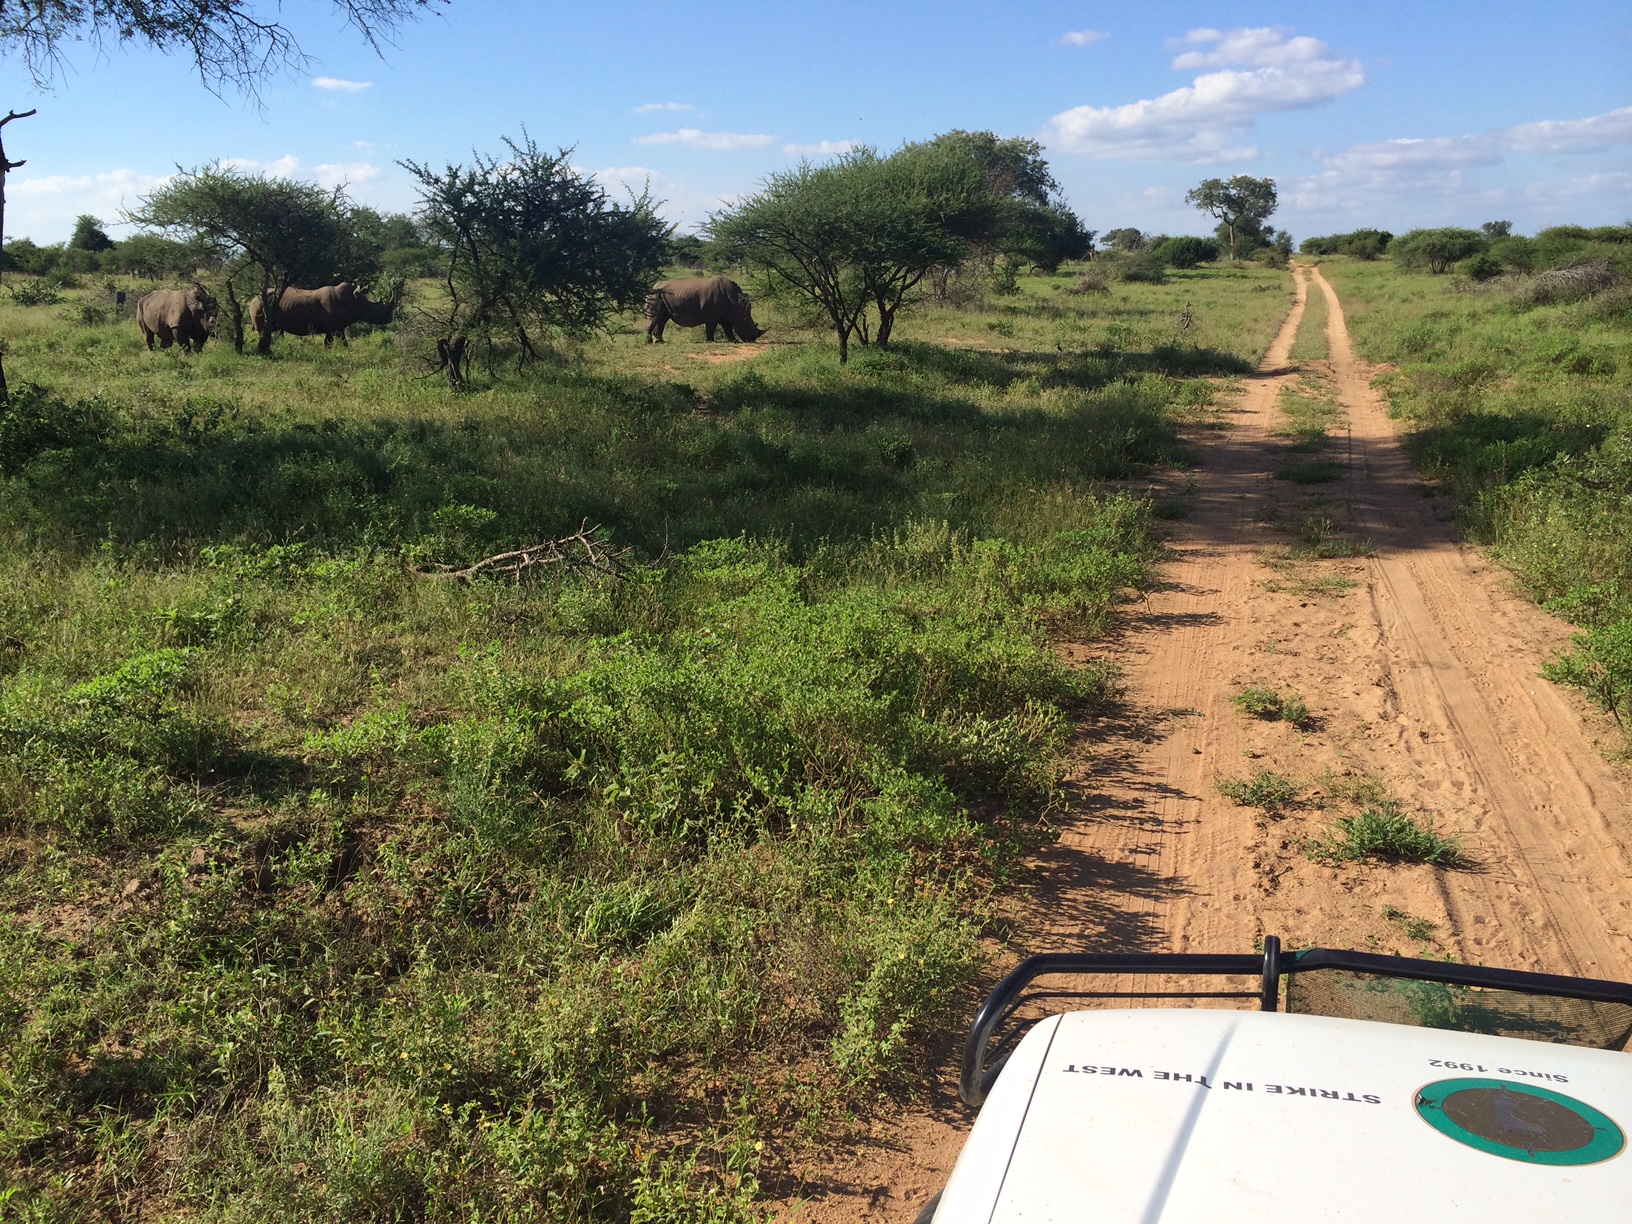 Checking up, while on patrol, on a group of rhinos who frequent a spot near a road.